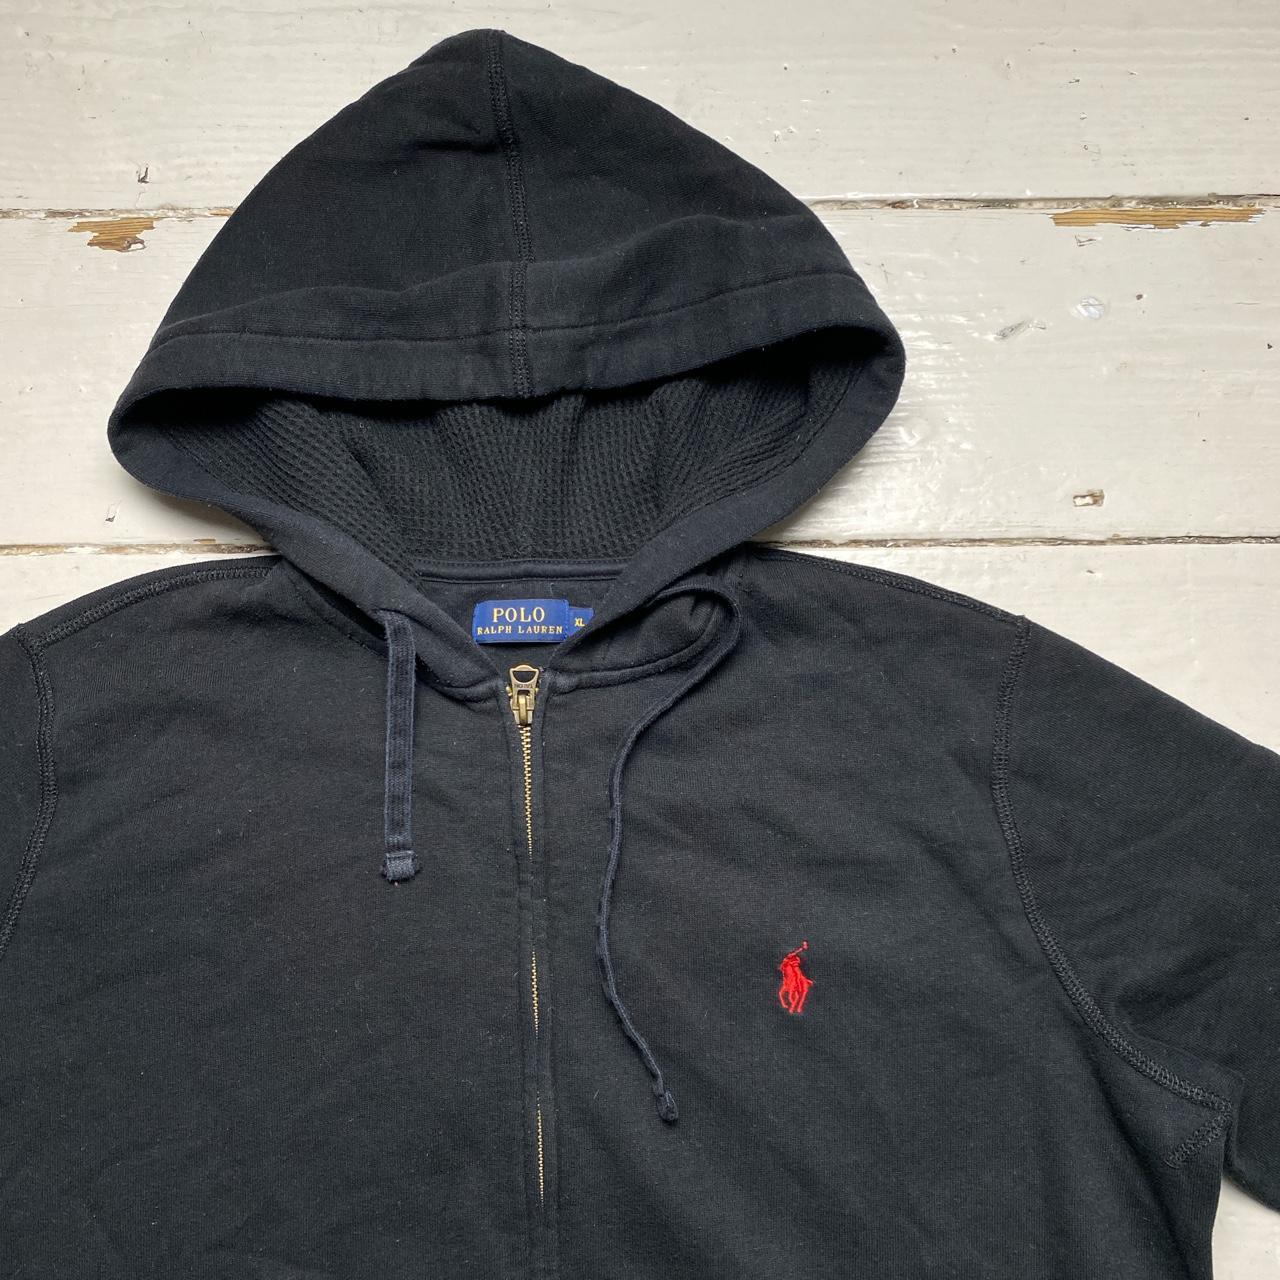 Ralph Lauren Polo Black and Red Hoodie